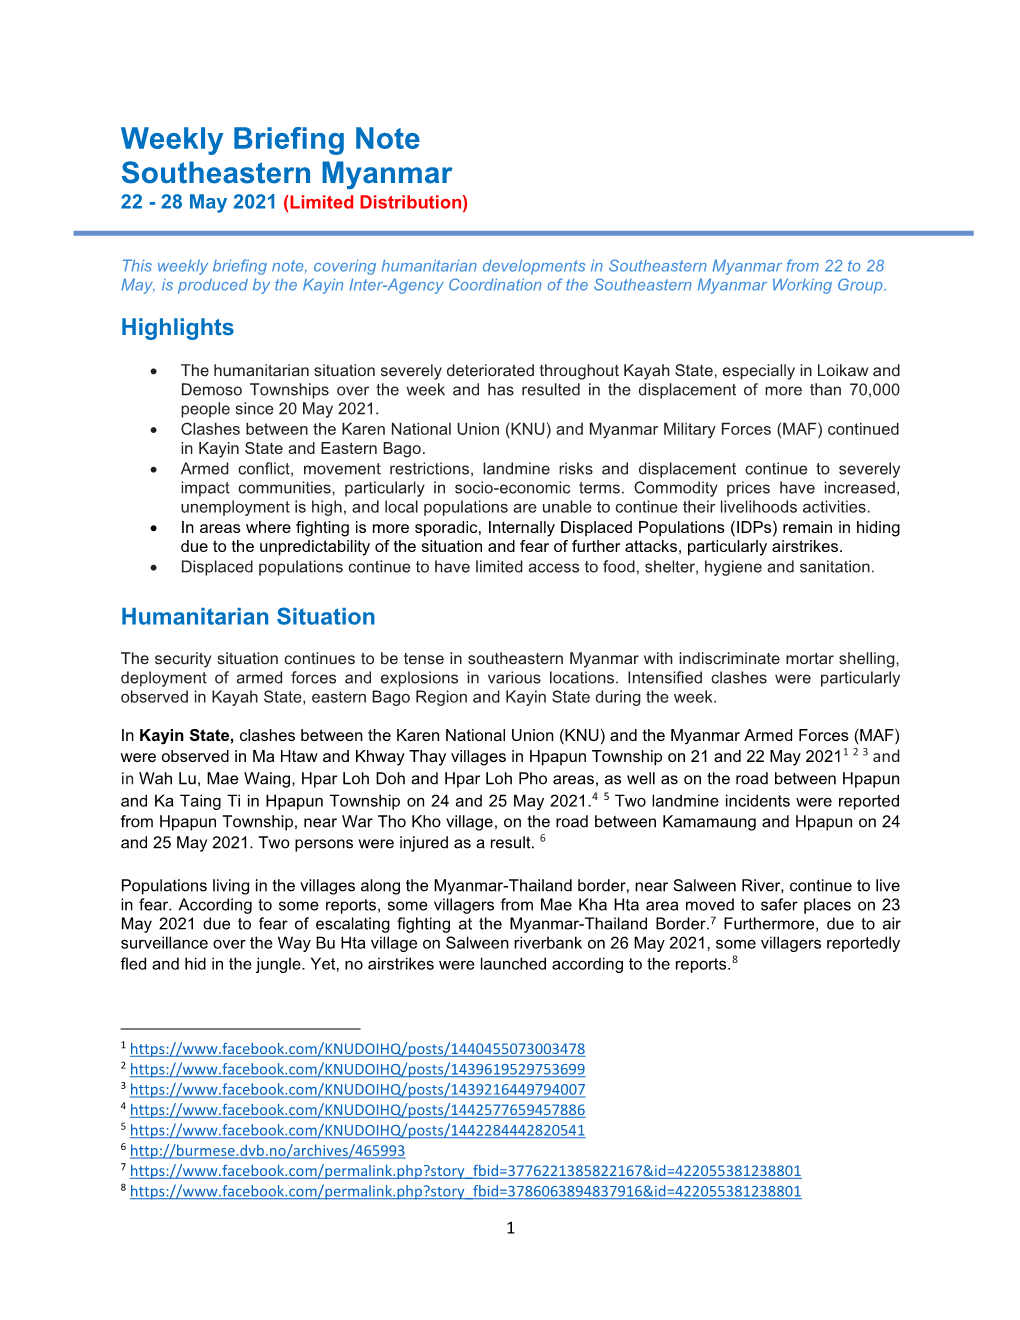 Weekly Briefing Note Southeastern Myanmar 22 - 28 May 2021 (Limited Distribution)